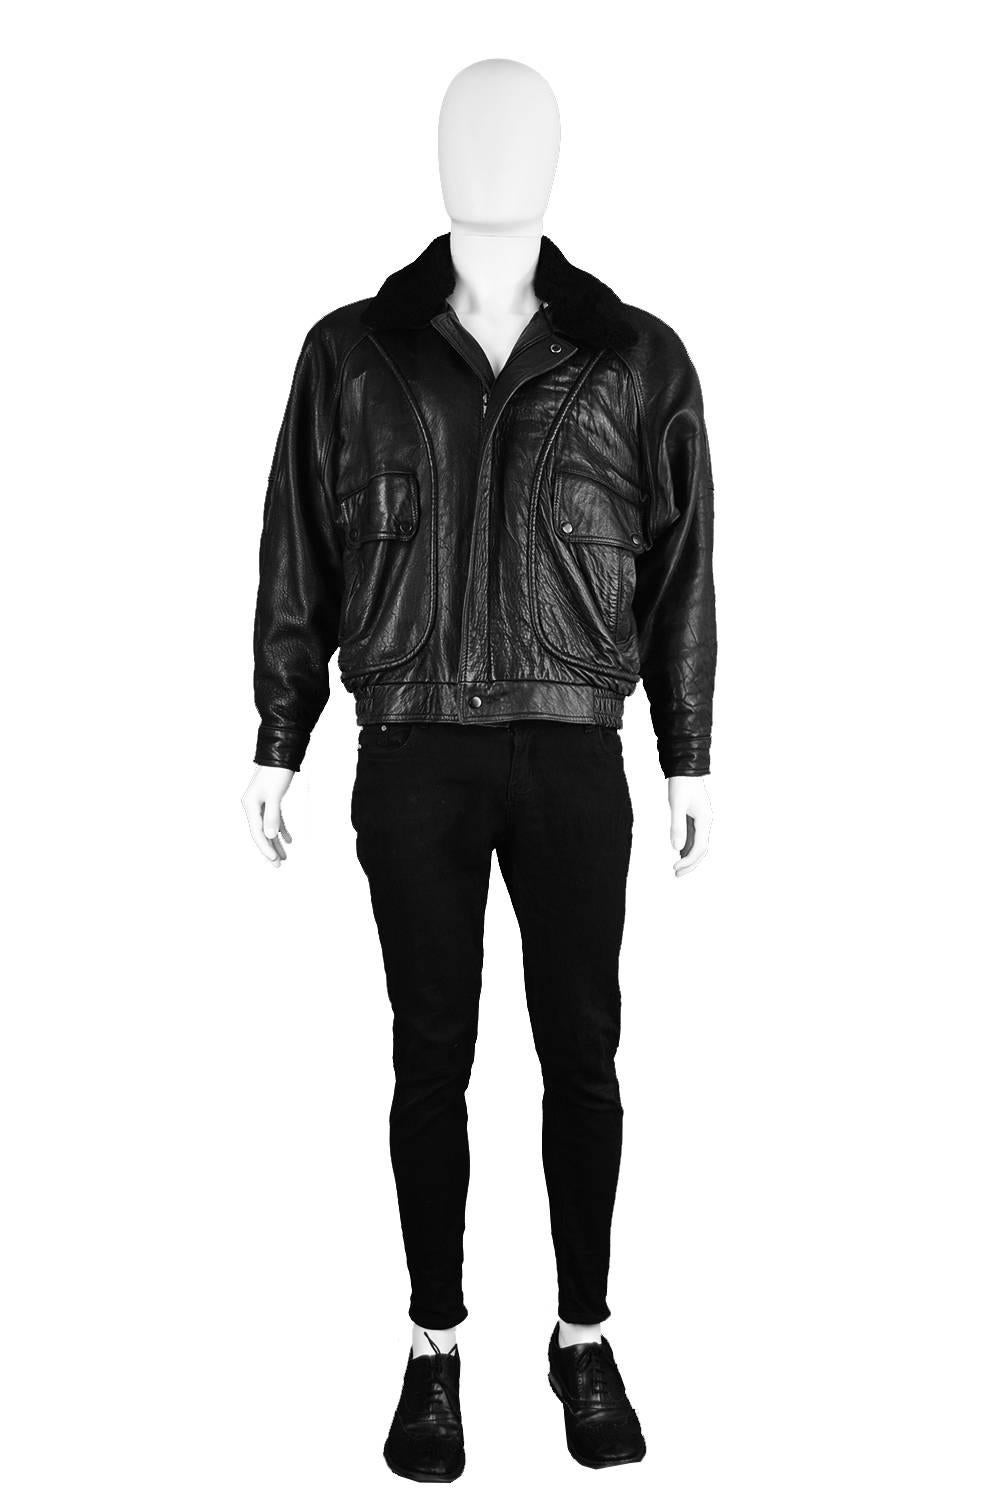 A buttery soft men's vintage leather coat / bomber jacket from 1988 with a detachable soft shearling collar and a bold atlas-inspired design on the lining. 

Estimated Size: Men's Medium to Large but this gives a slouchy, oversized fit. 
Chest -